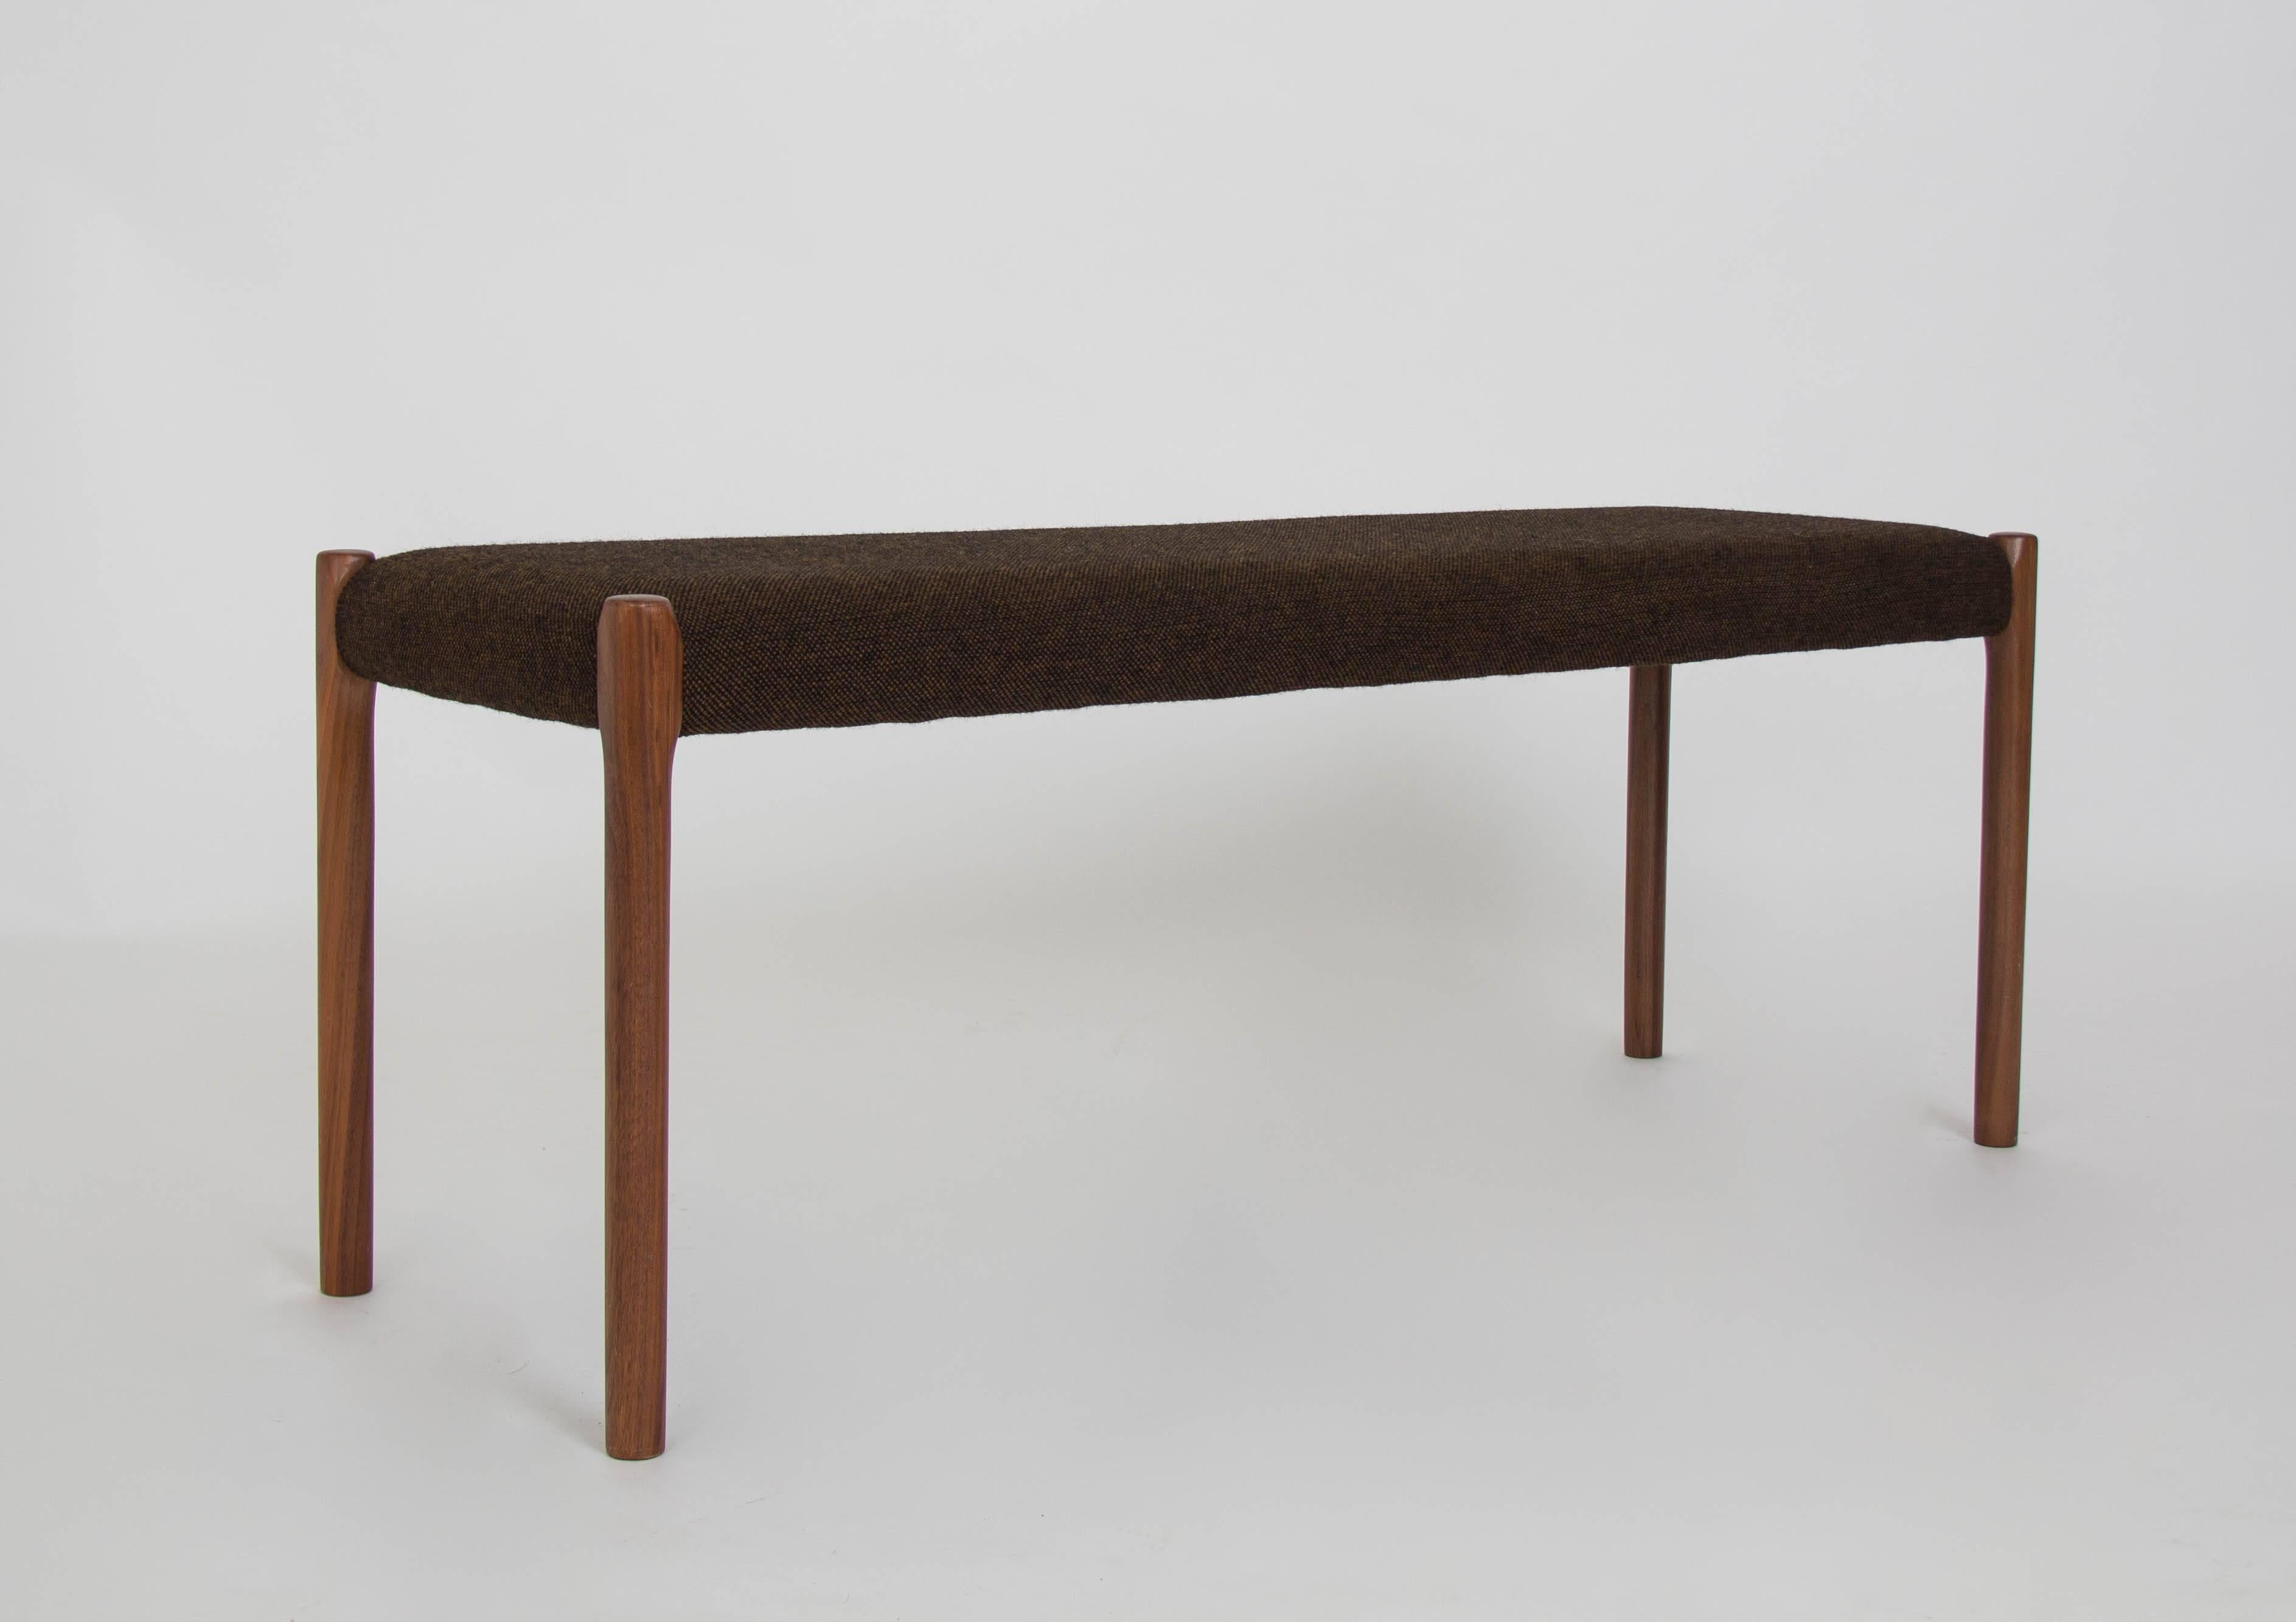 A long, upholstered bench designed by Niels Møller for JL Møller Møbelfabrik of Denmark. The model 63A bench was designed in 1963 and features tapered legs of solid walnut, and wooden frame lightly padded and wrapped in a brown wool